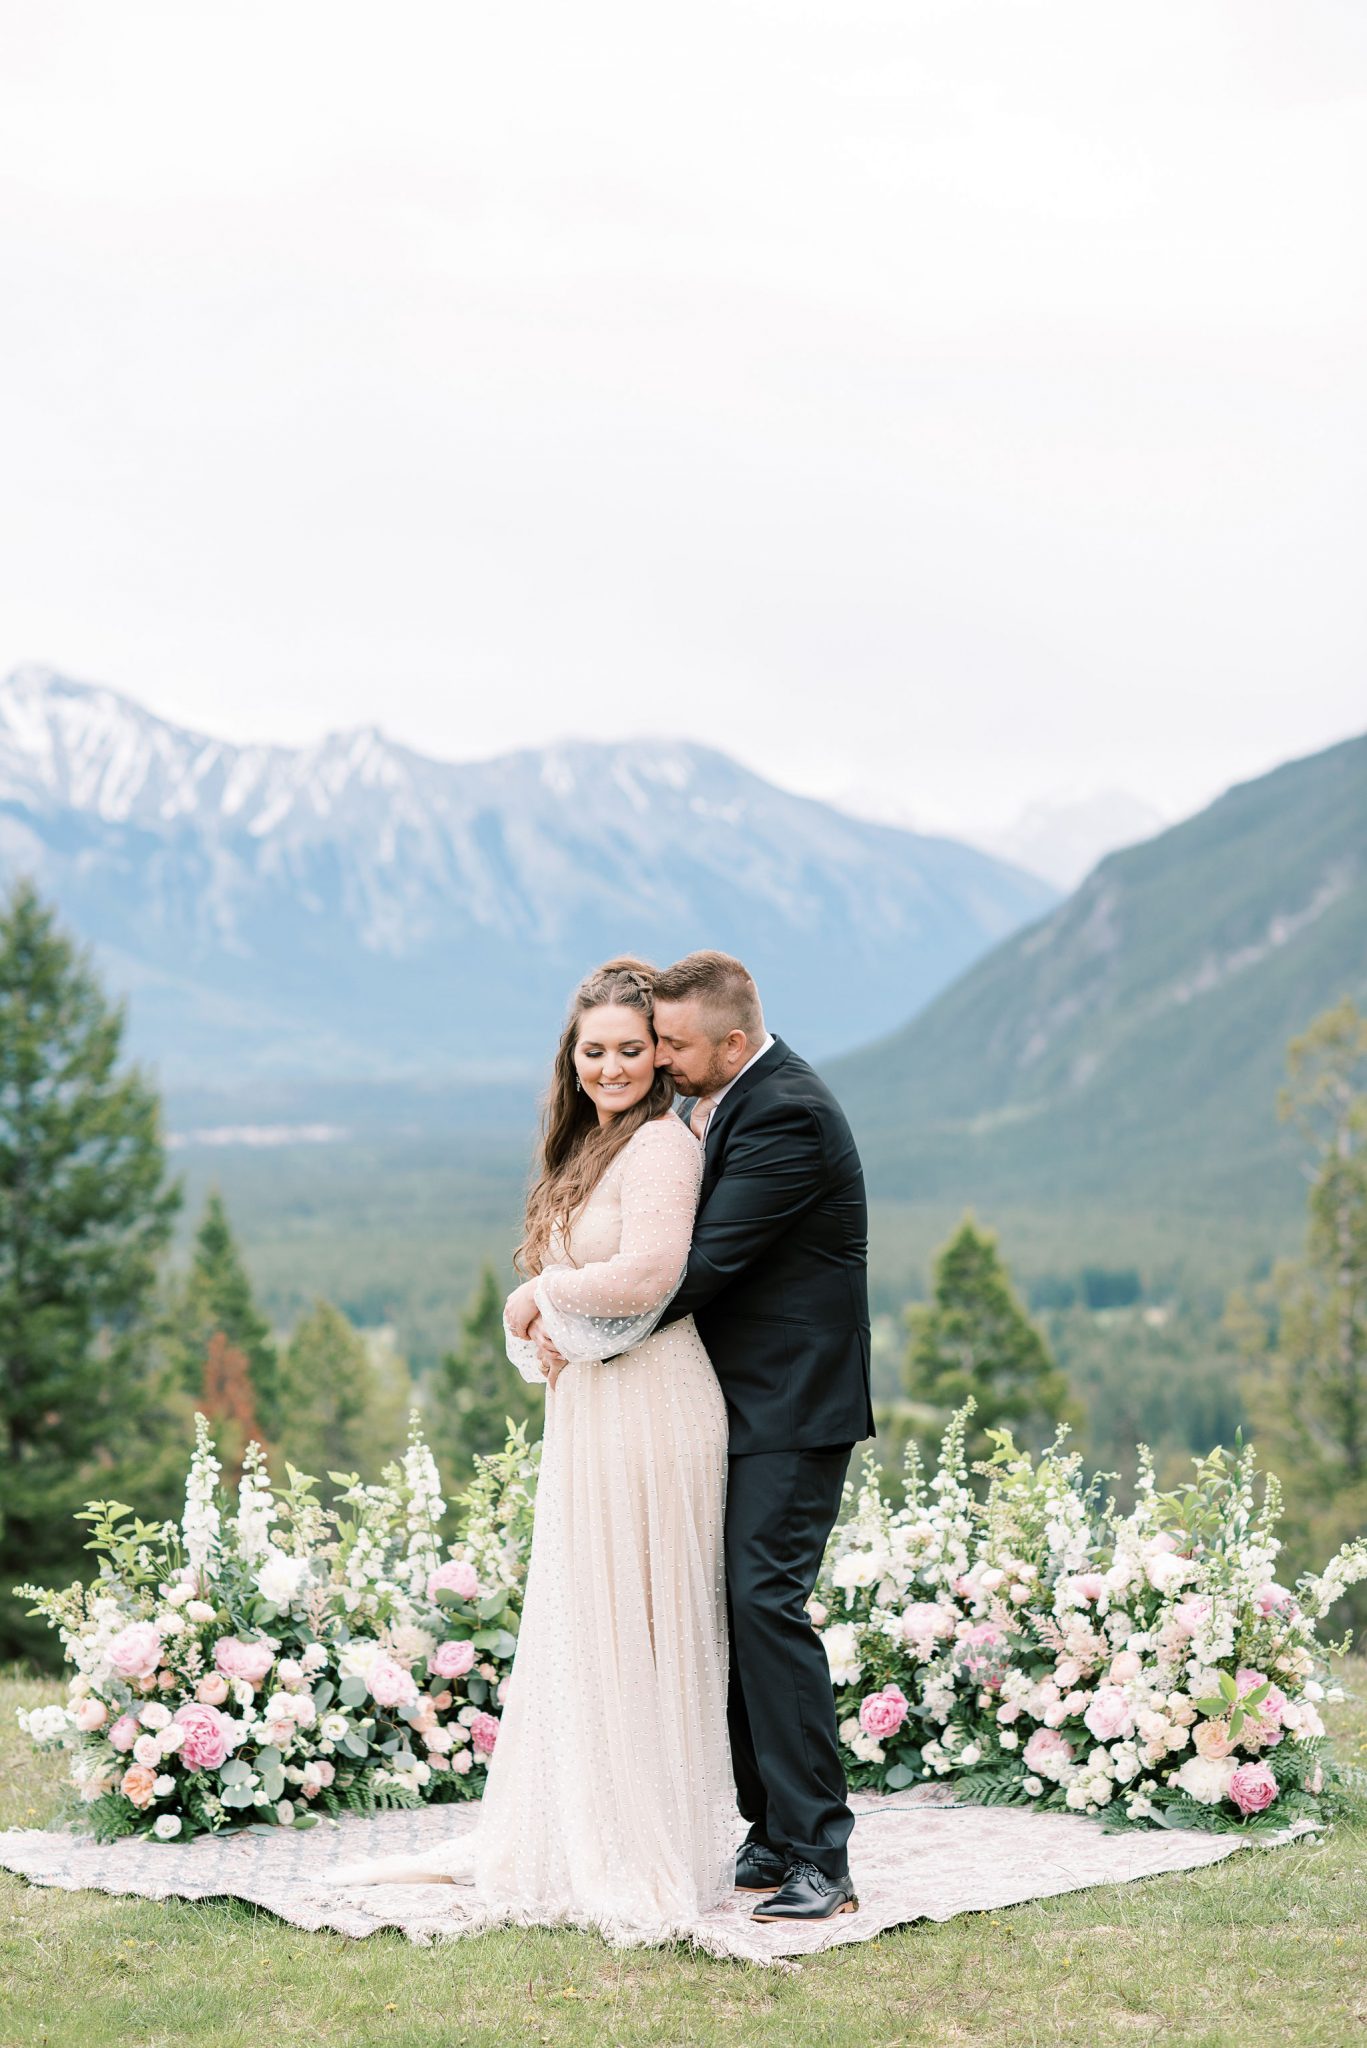 Bride and groom pose in front of a grounded floral arch created by Flowers by Janie for their mountainside elopement